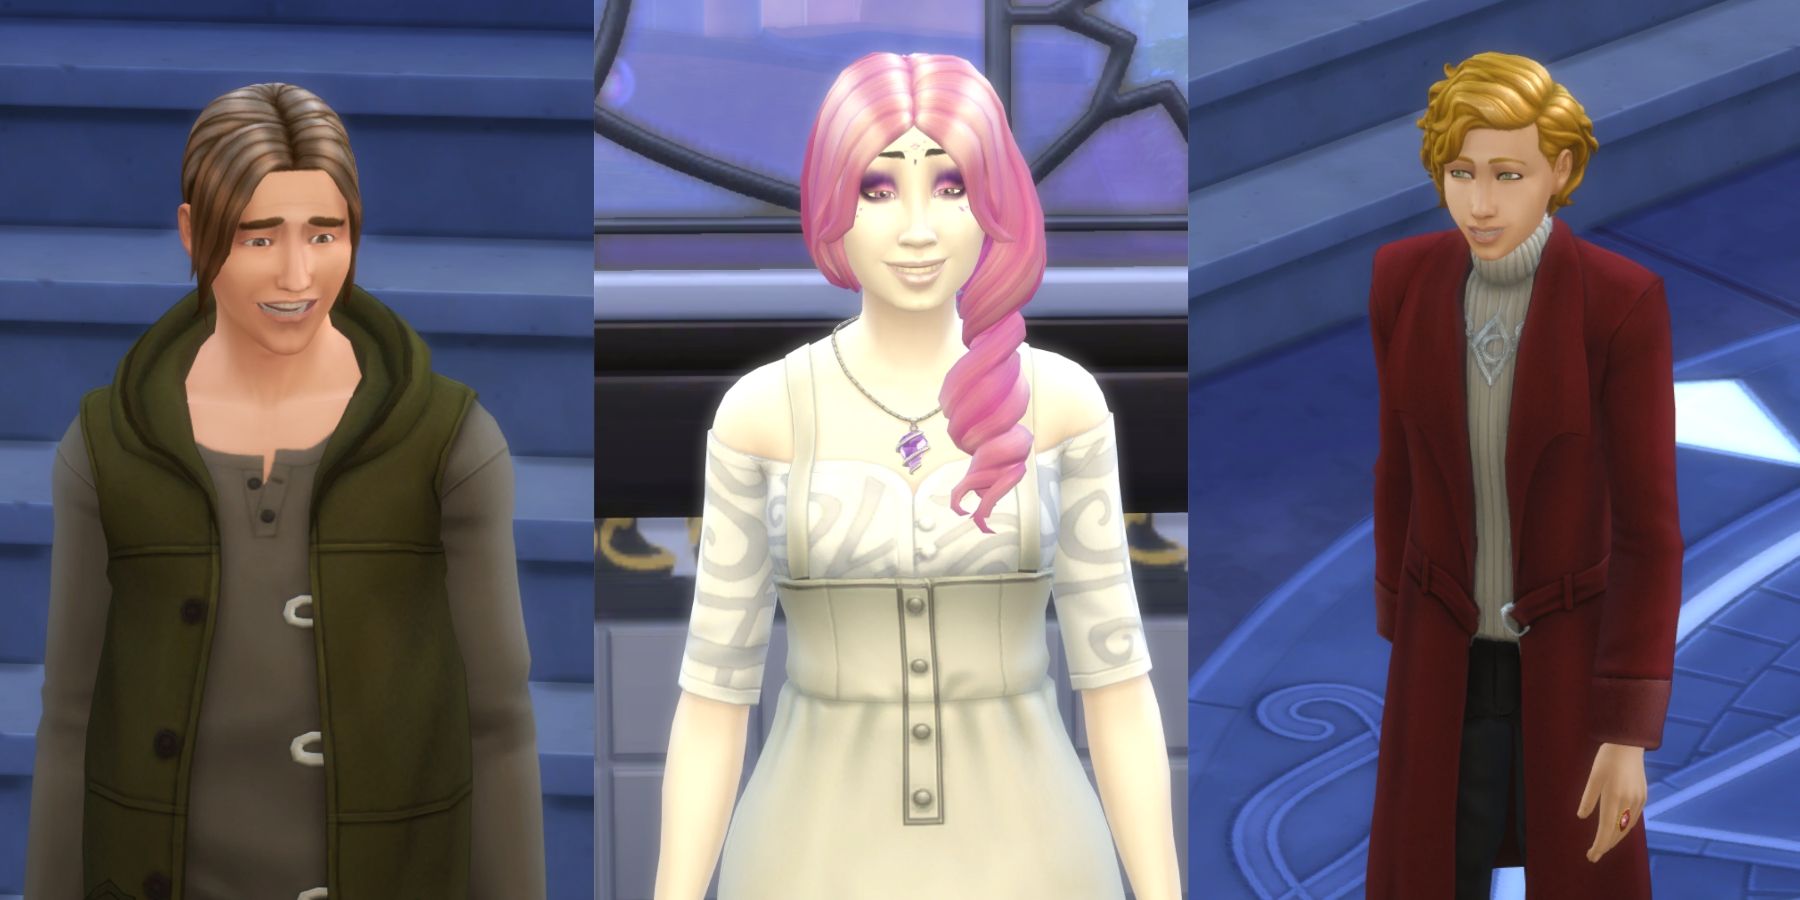 the three sages in the sims 4